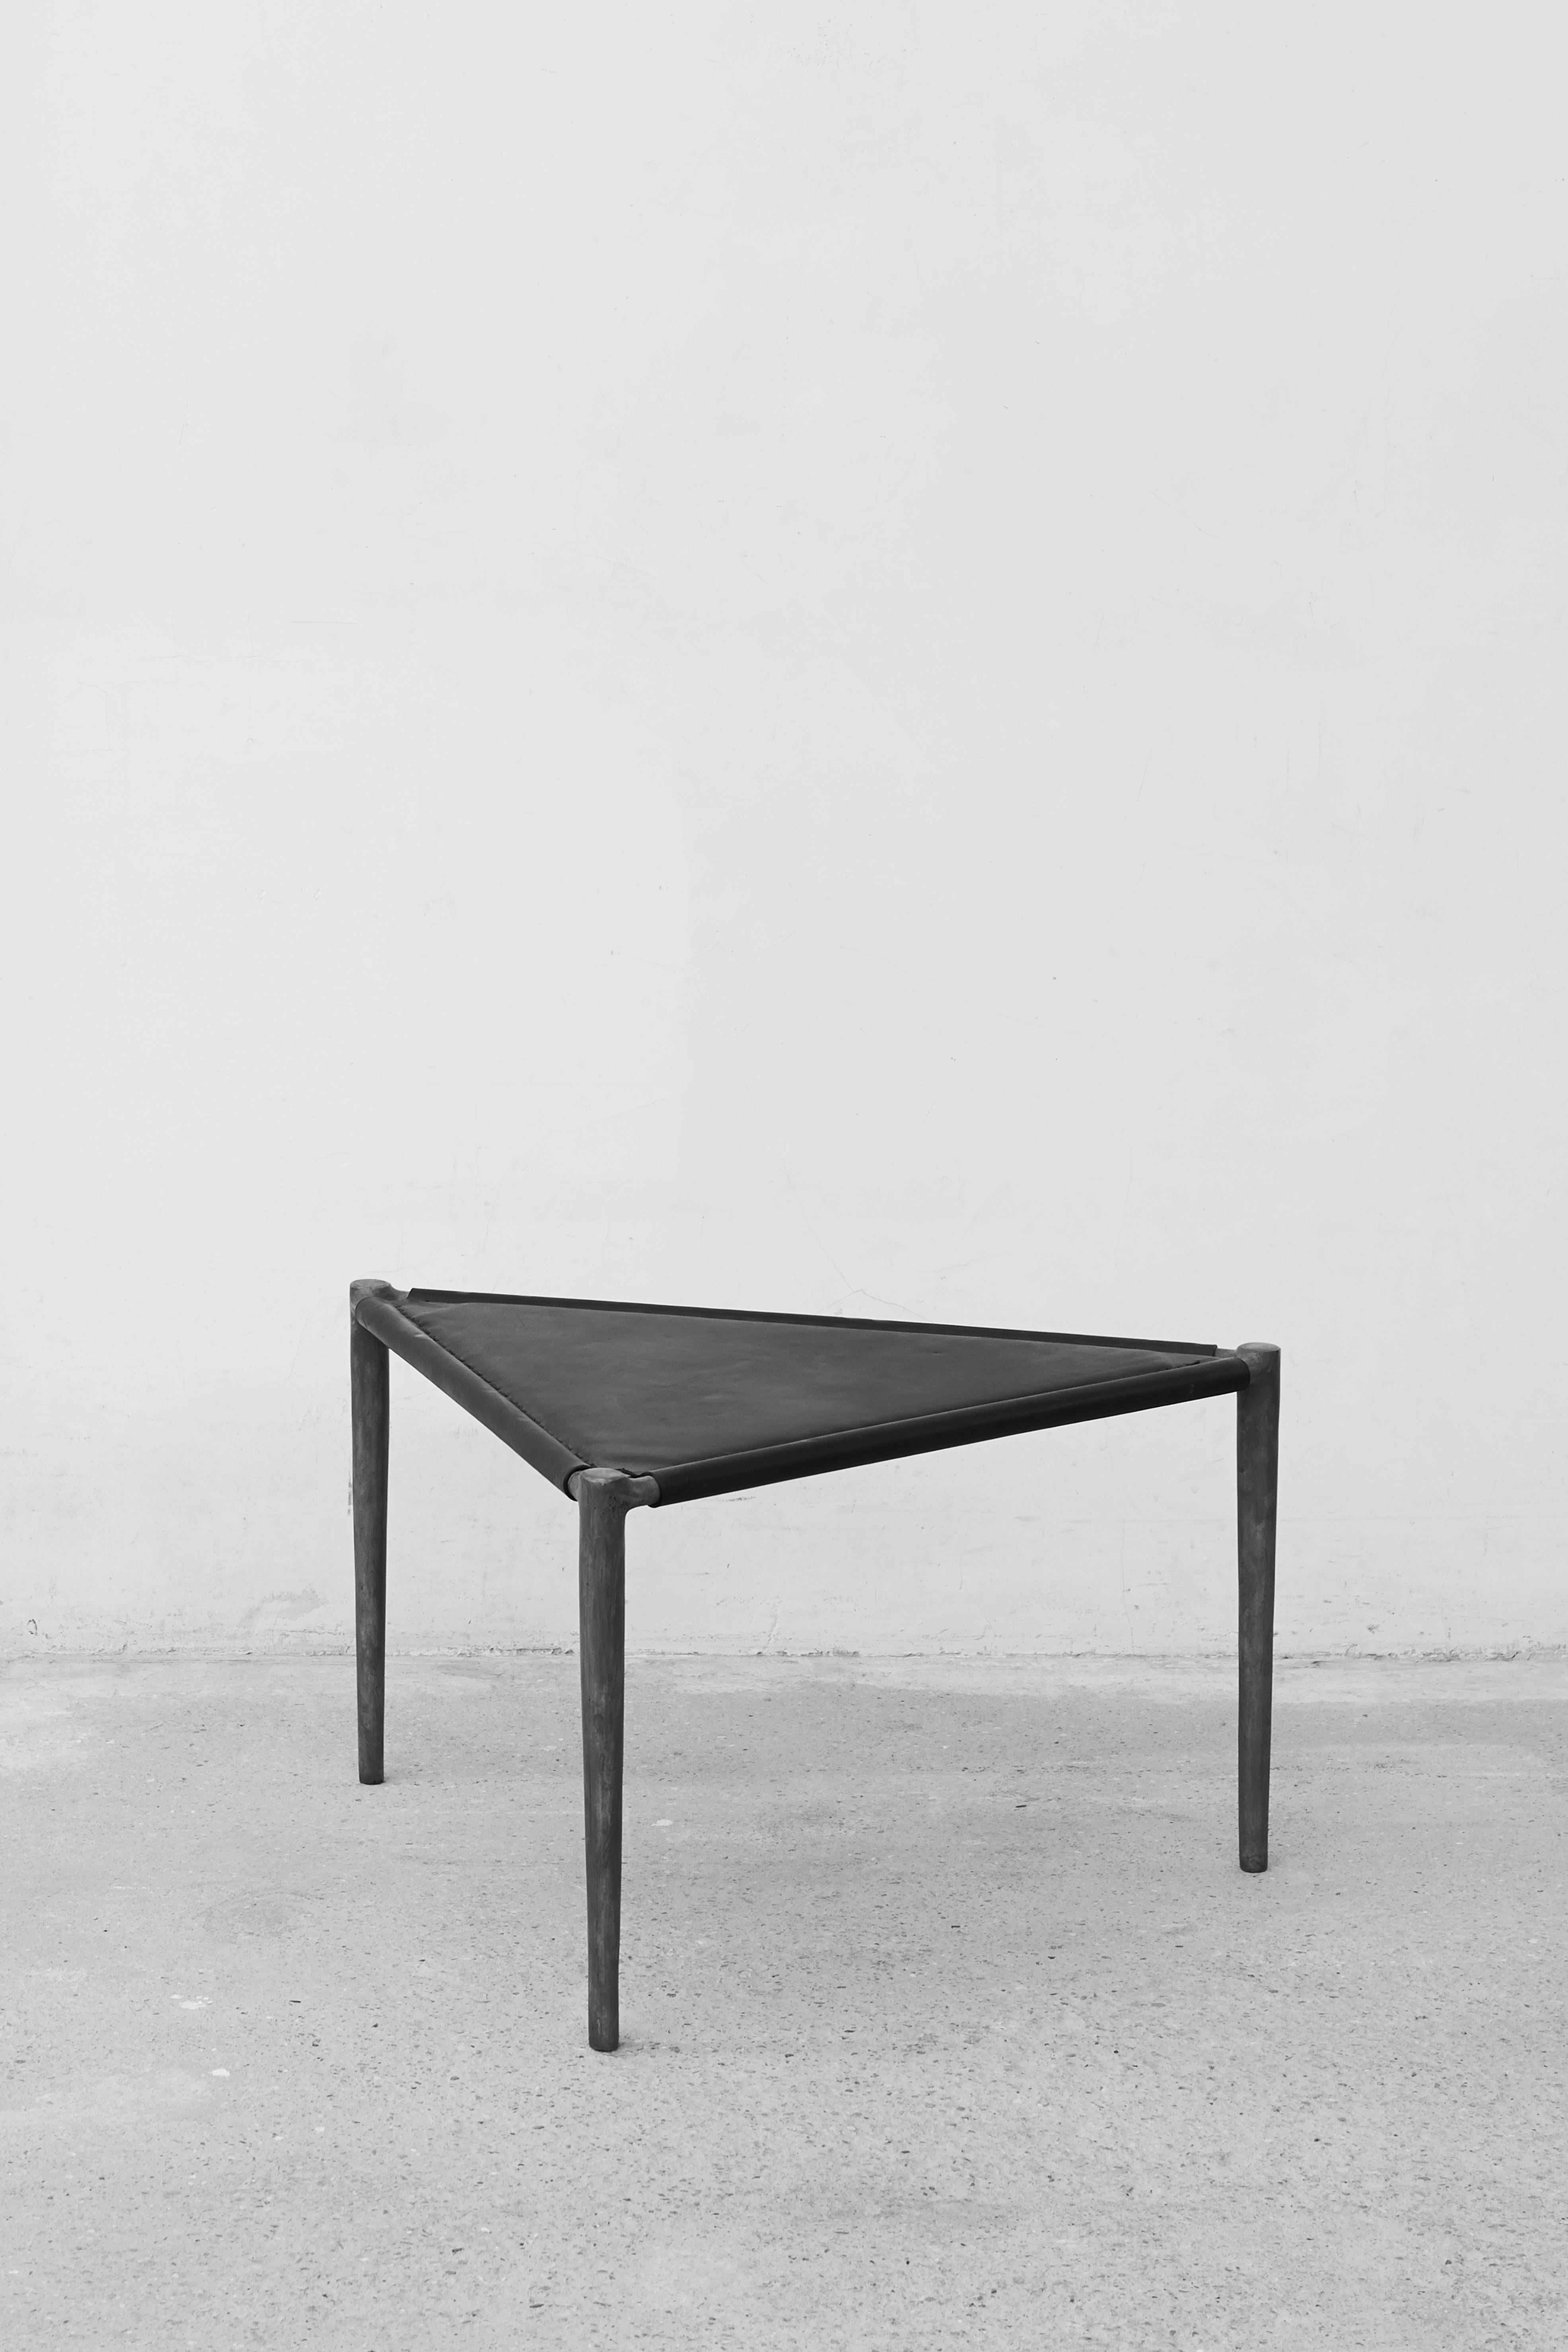 Alchemy stool by Rick Owens
2013
Dimensions: L 62 x W 50 x H 34 cm
Materials: Bronze
Weight: 10.5 kg

available in Black finish or Nitrate (Dark Brown) finish, please contact us.

Rick Owens is a California-born fashion and furniture has developed a